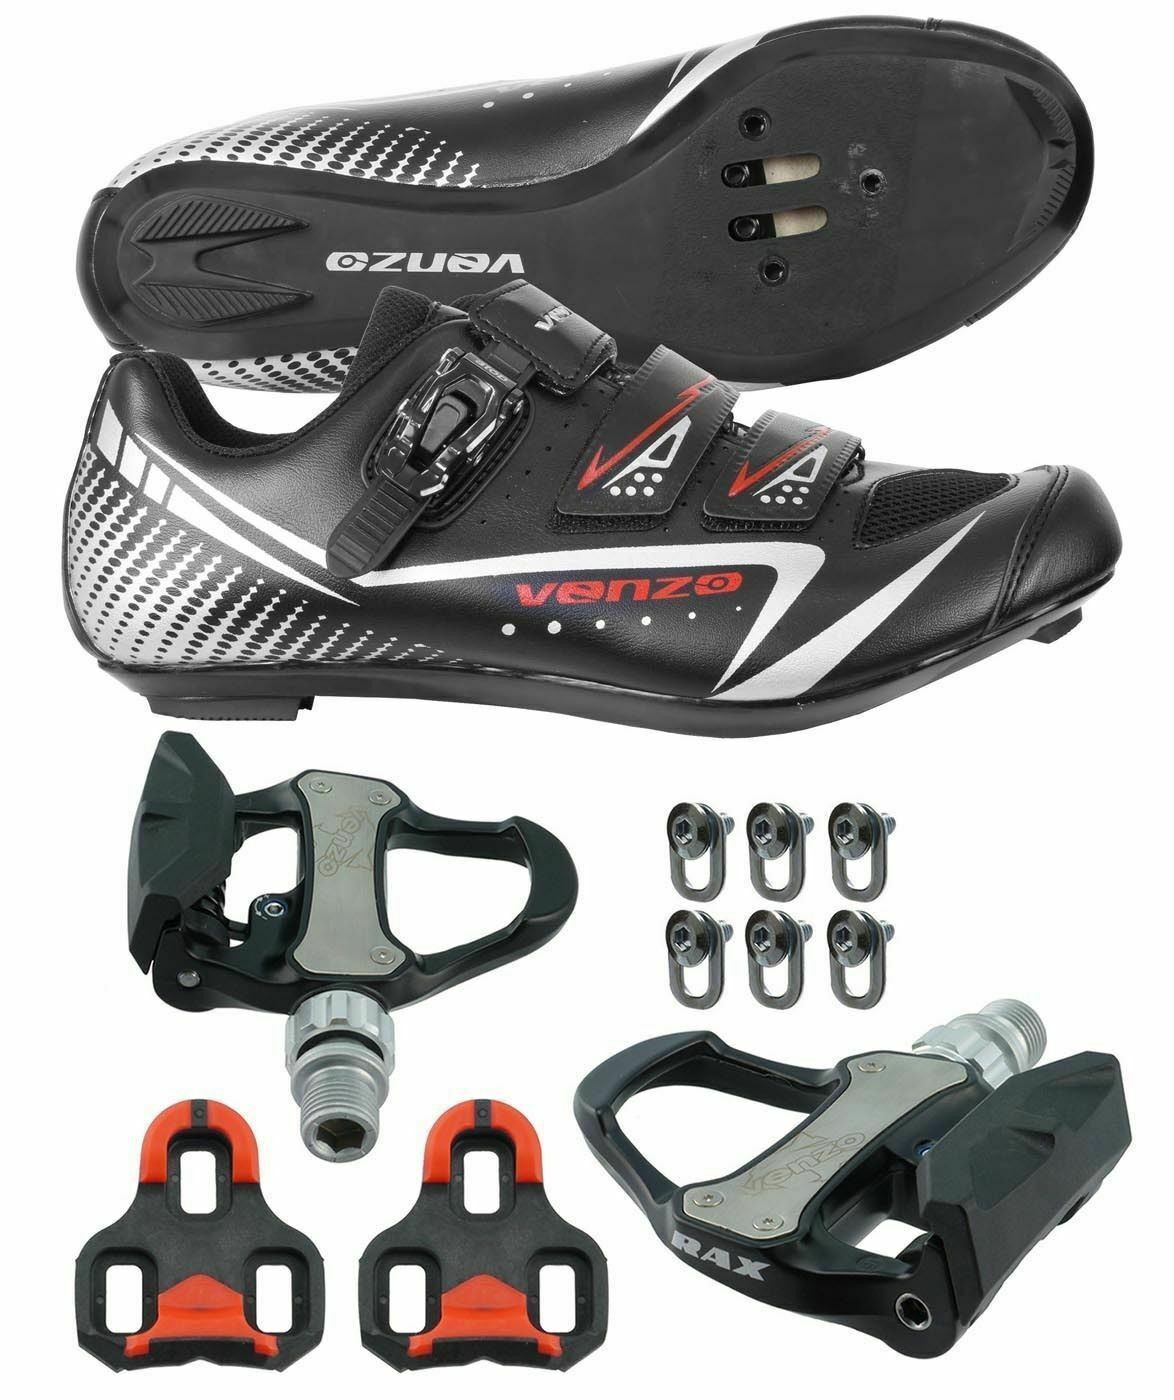 spd cleats on road shoes